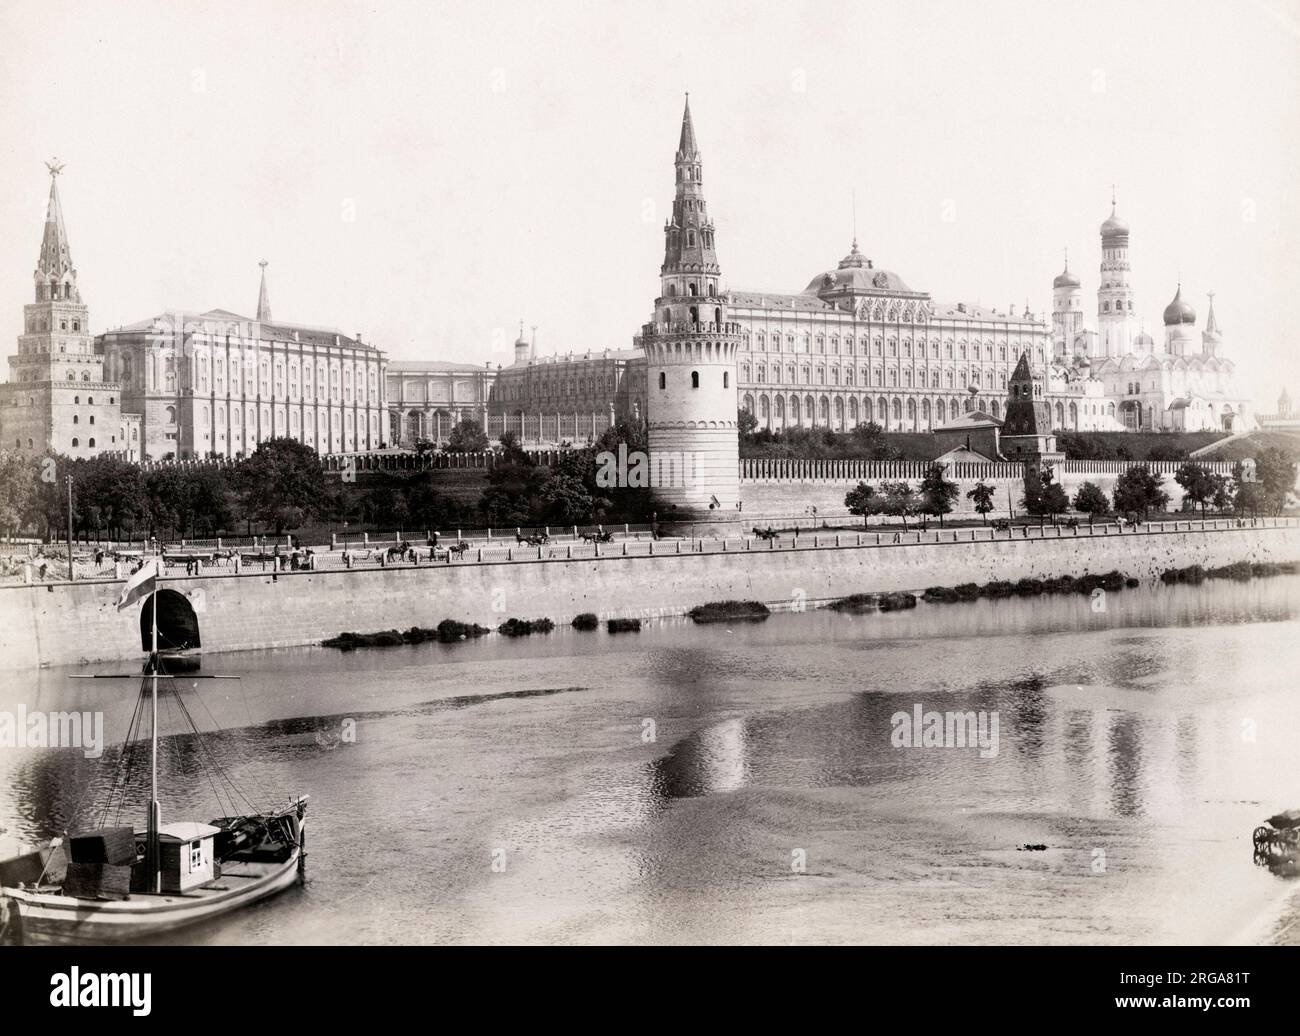 View of the Kremlin from across the river, Moscow Russia. Vintage 19th century photograph. Stock Photo